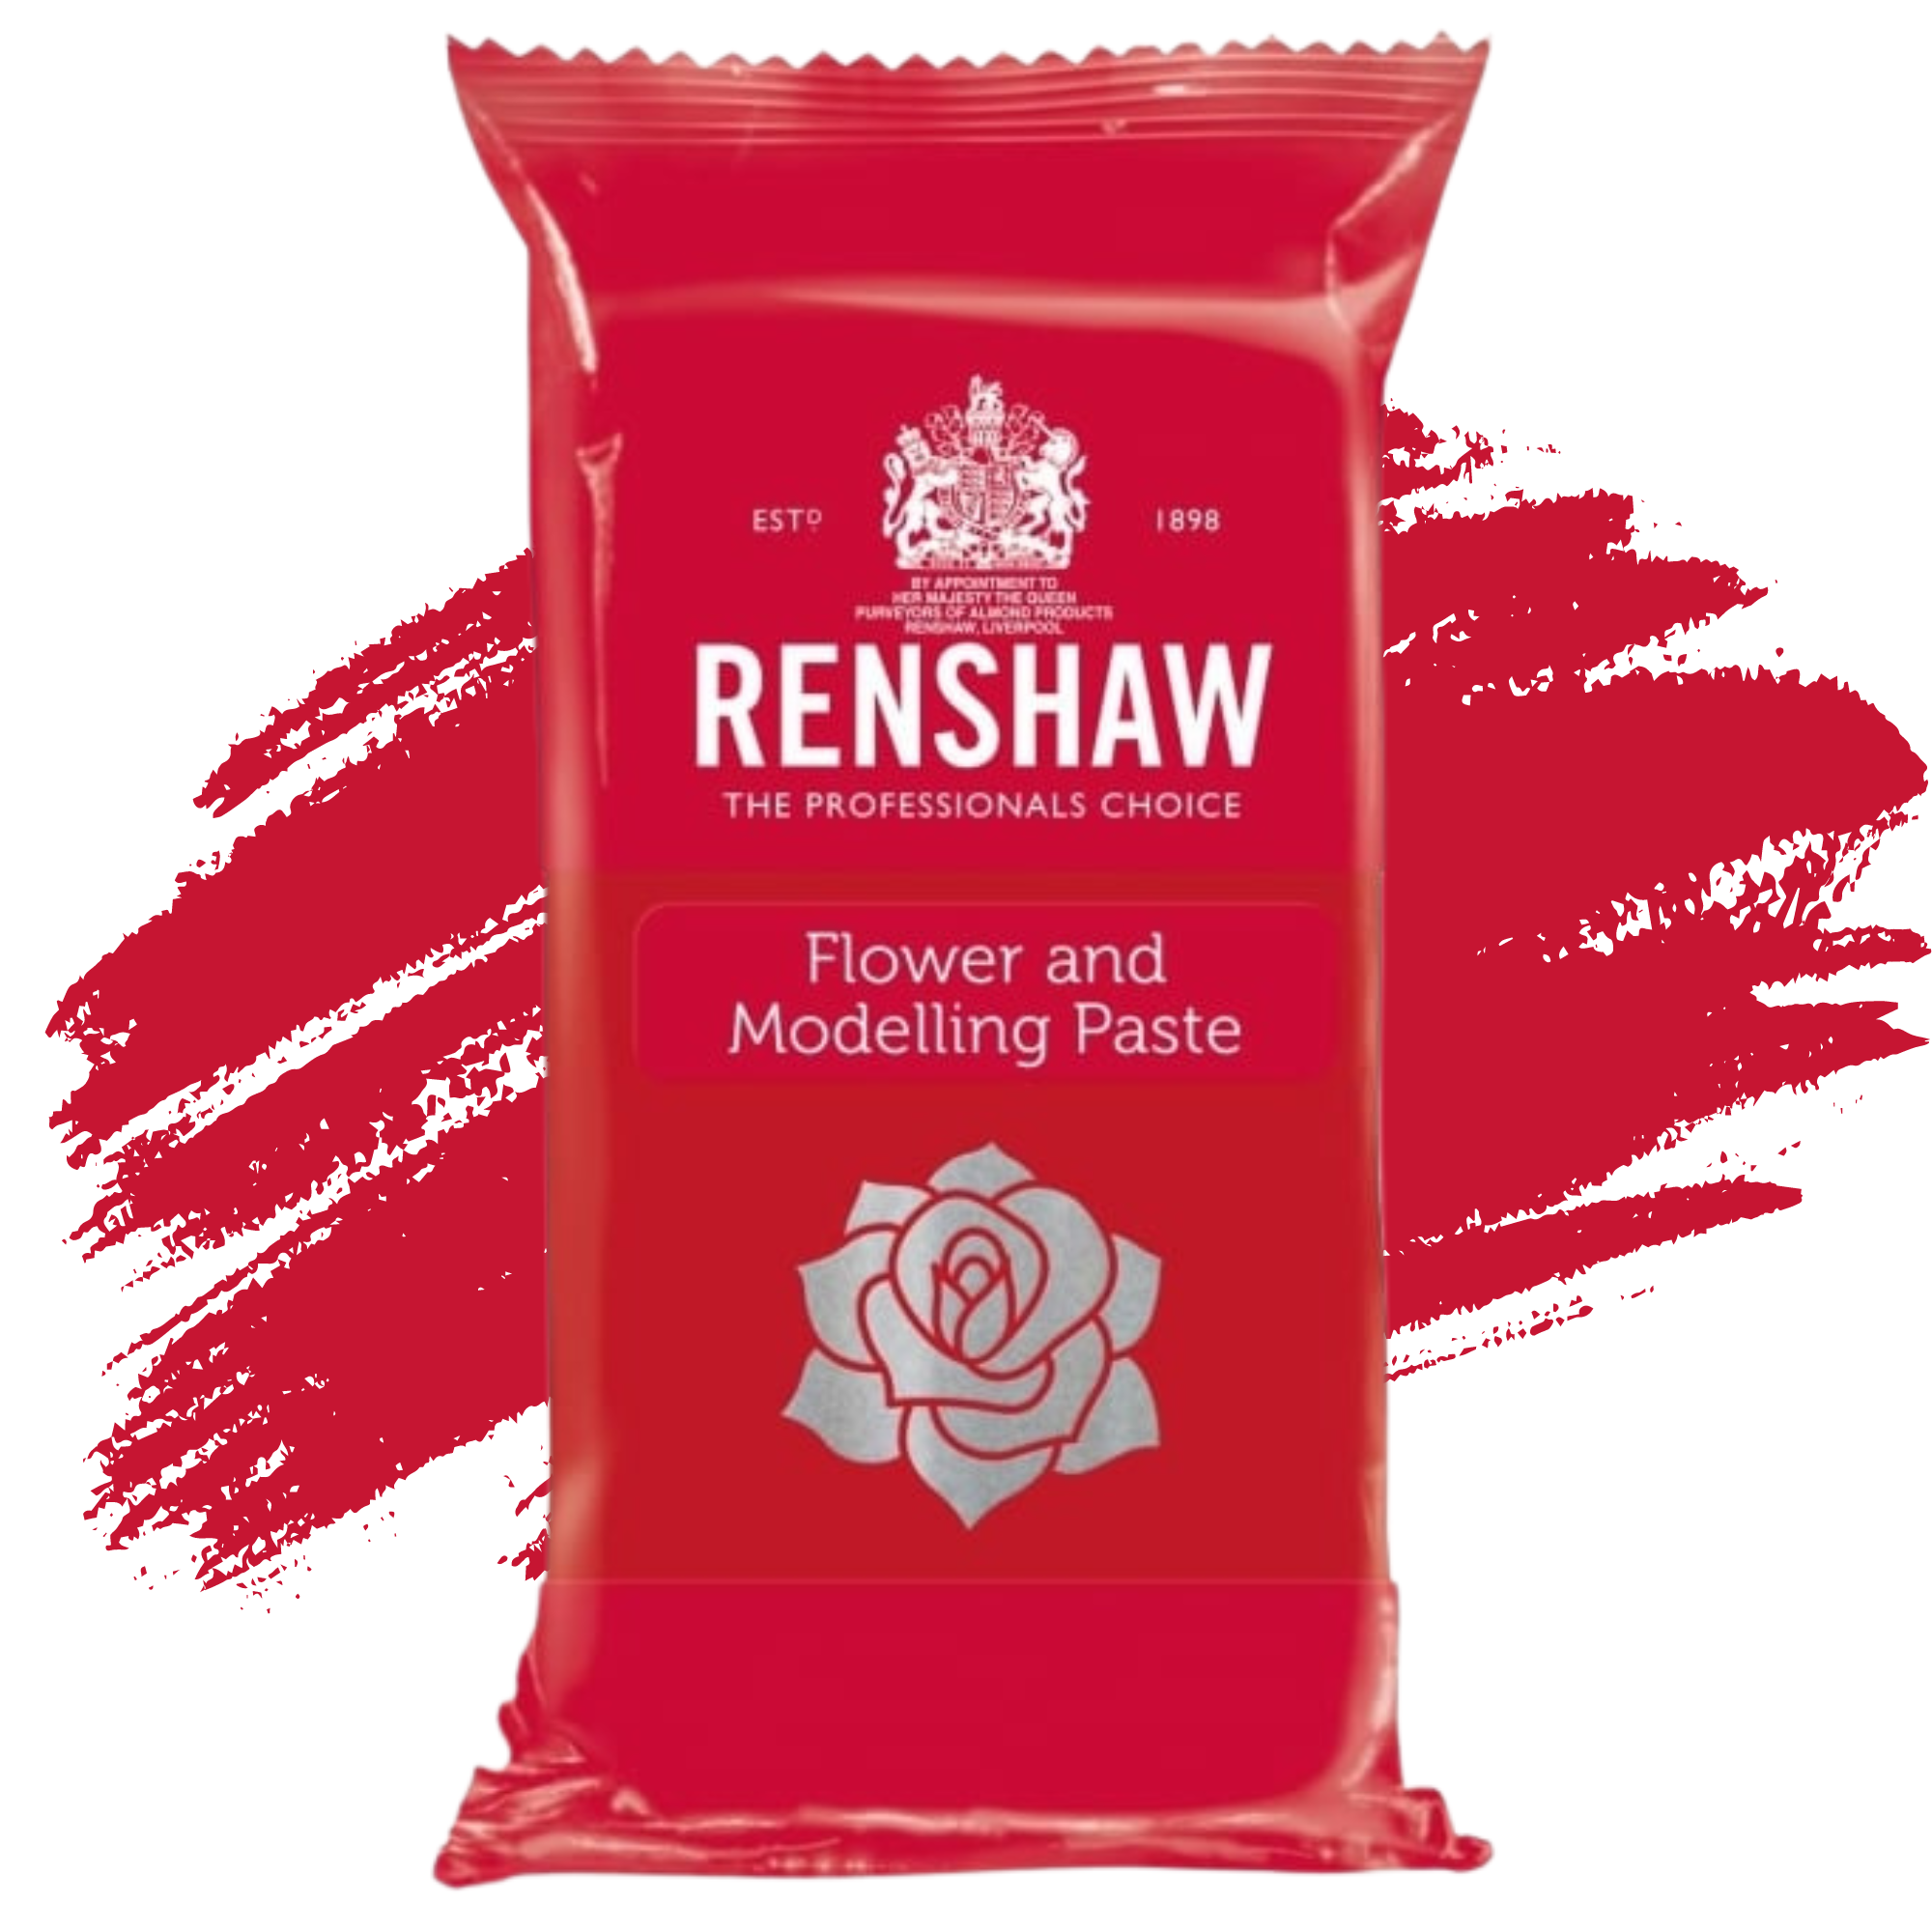 Renshaw - Professional Flower and Modelling Paste Carnation Red 250g